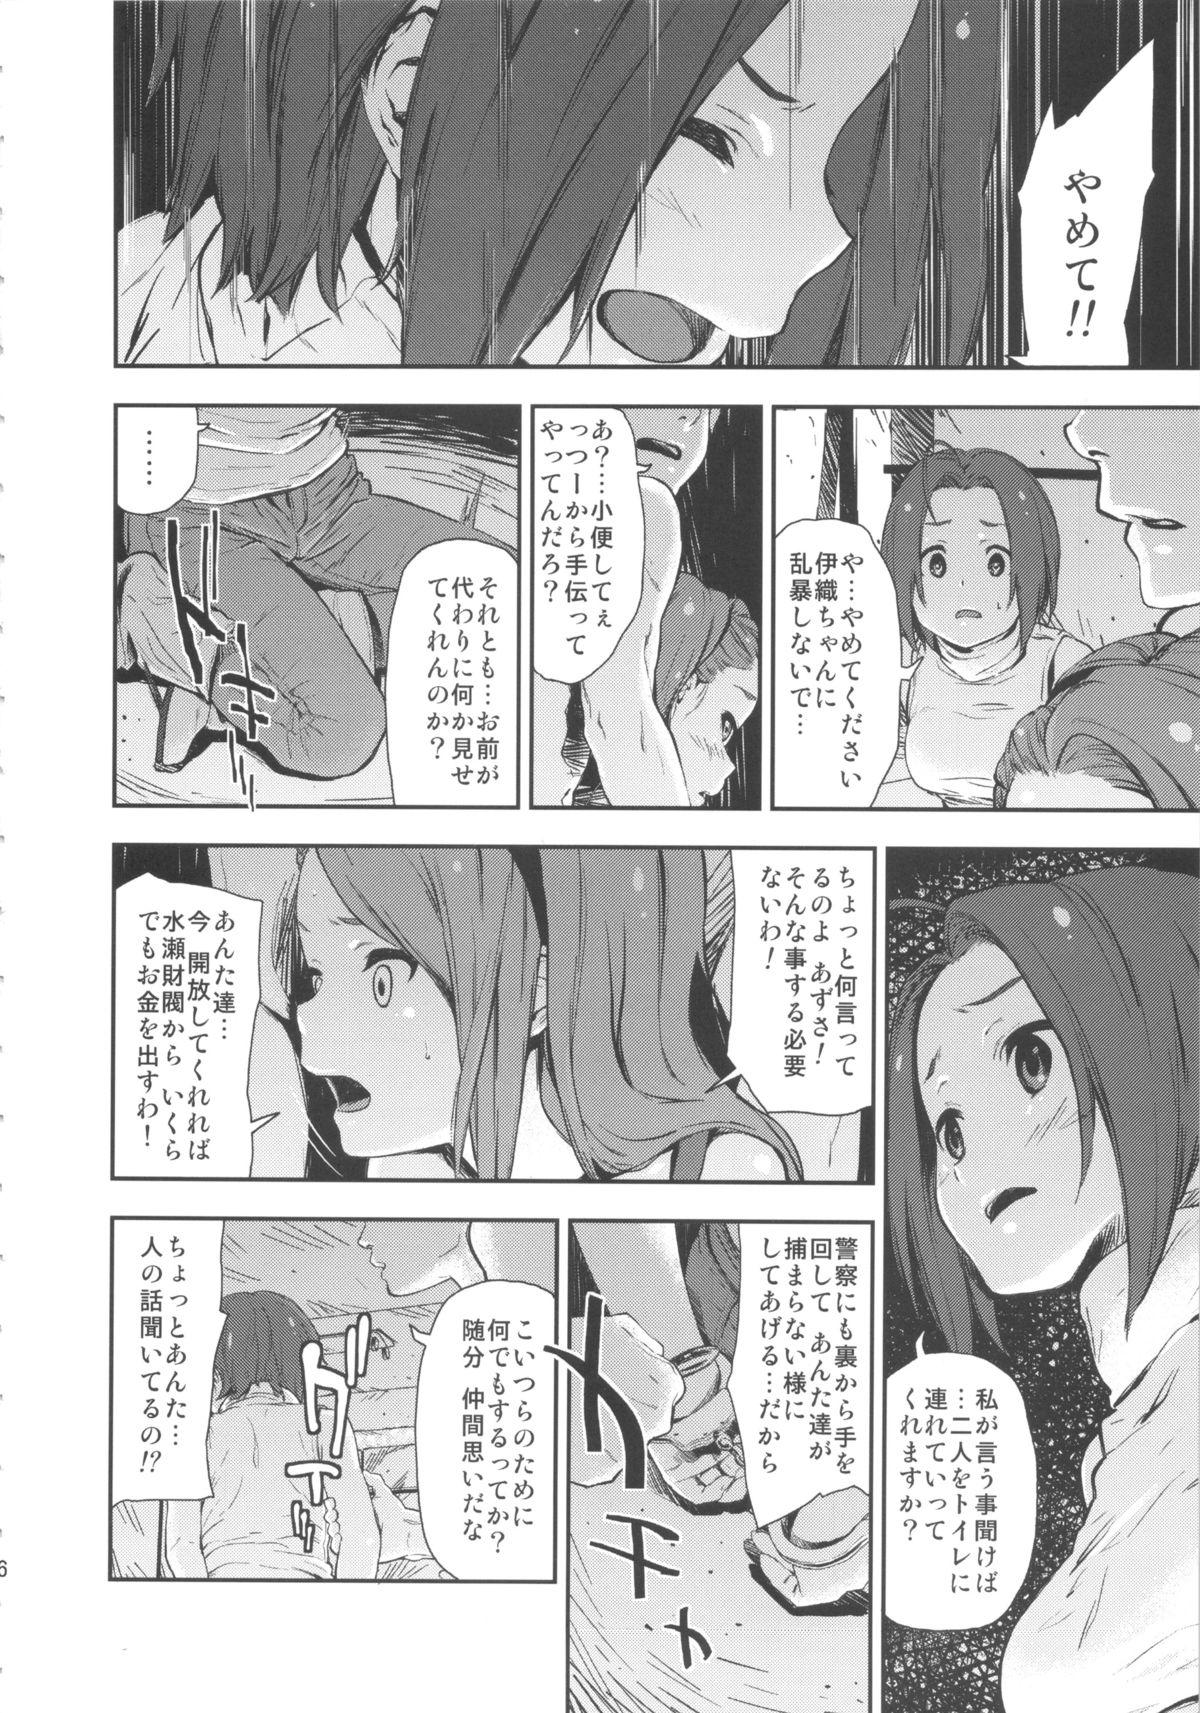 Relax Angel's t@le - The idolmaster Ass Fetish - Page 6